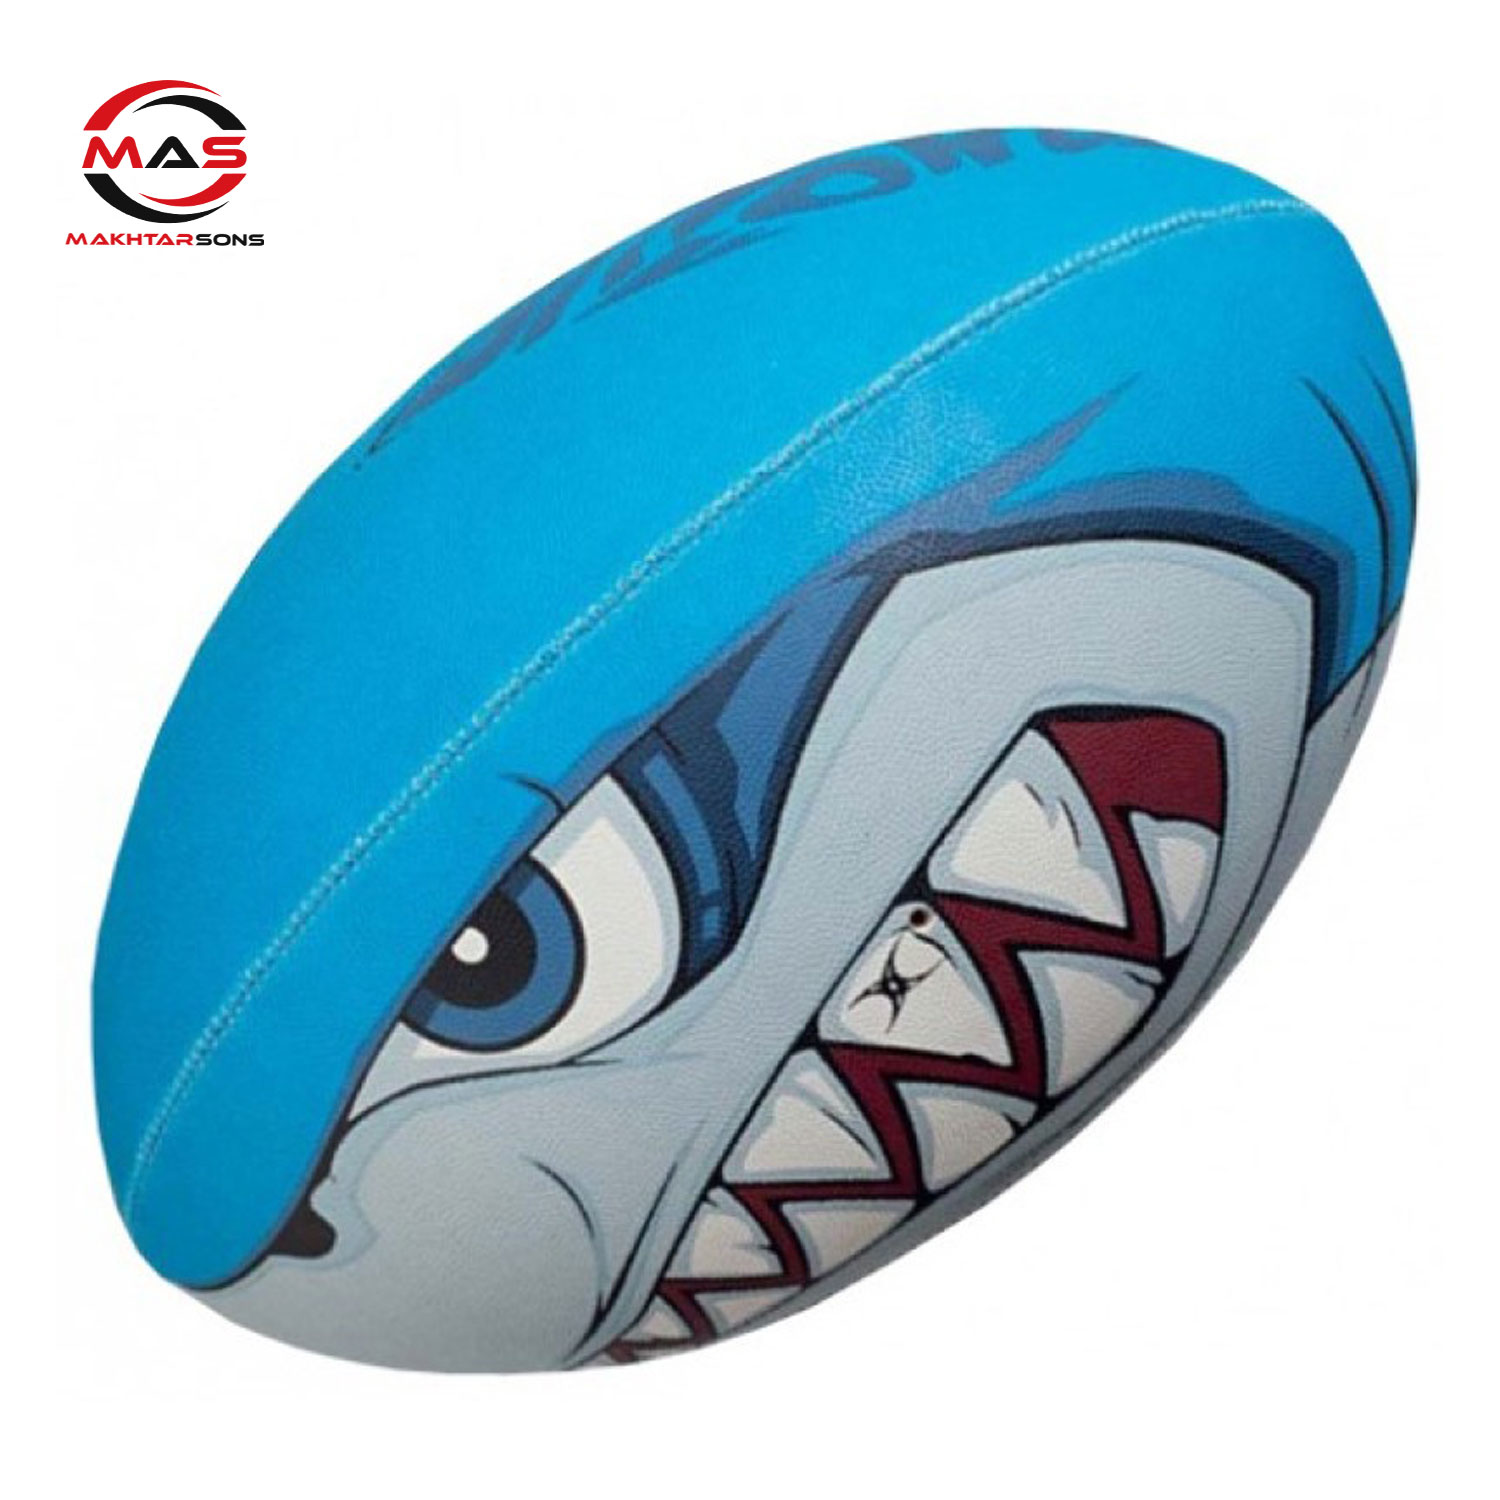 RUGBY BALL | MAS 430